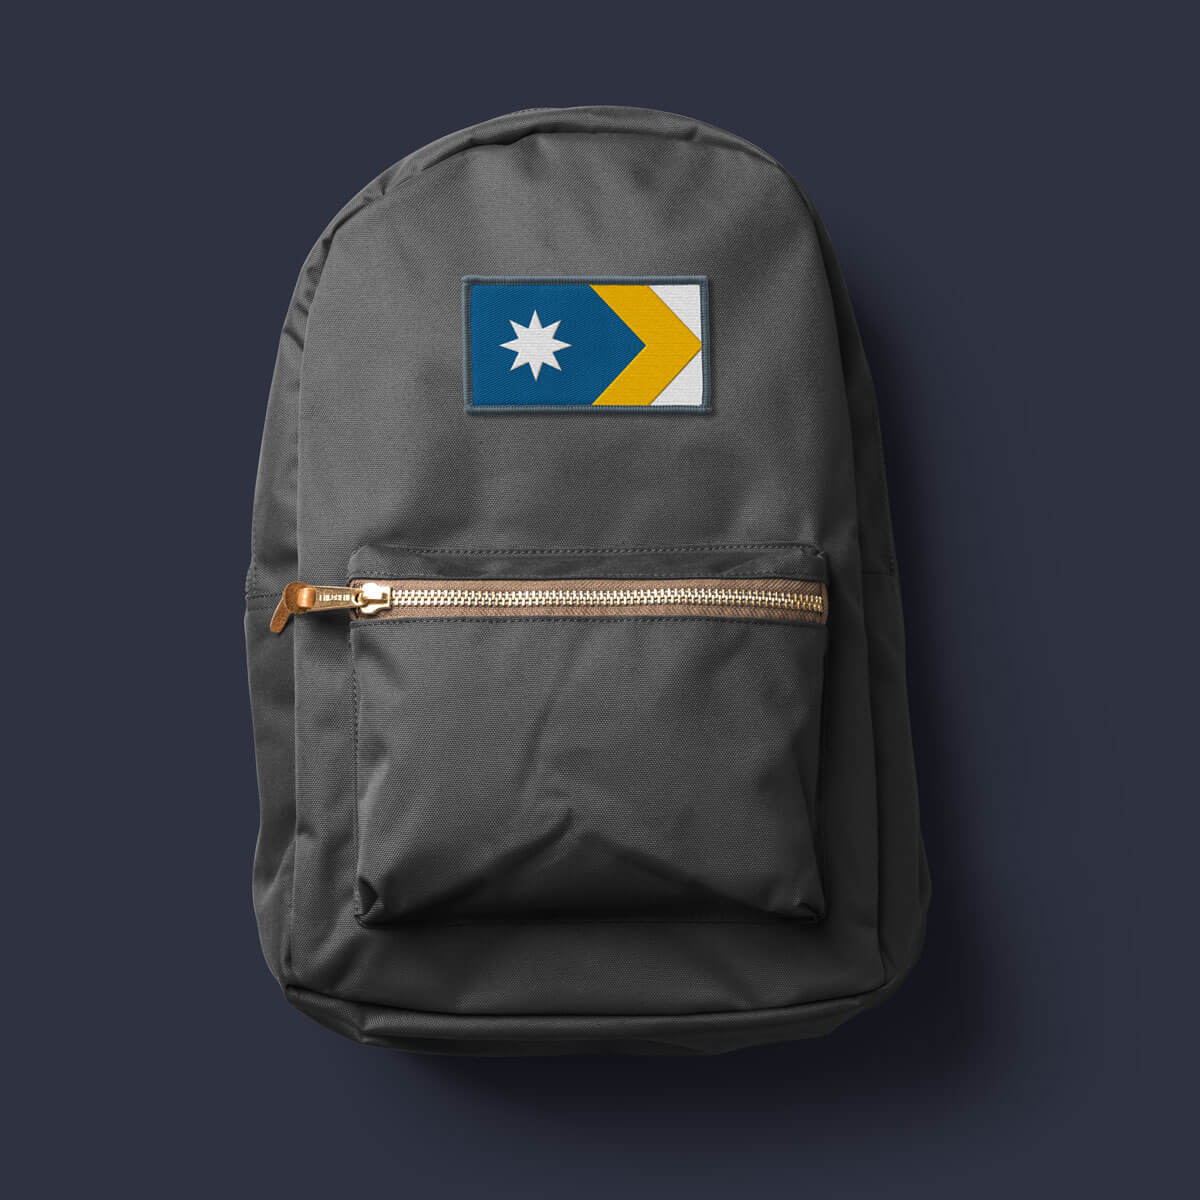 A Unity Flag patch stitched into a backpack, with an Australian passport